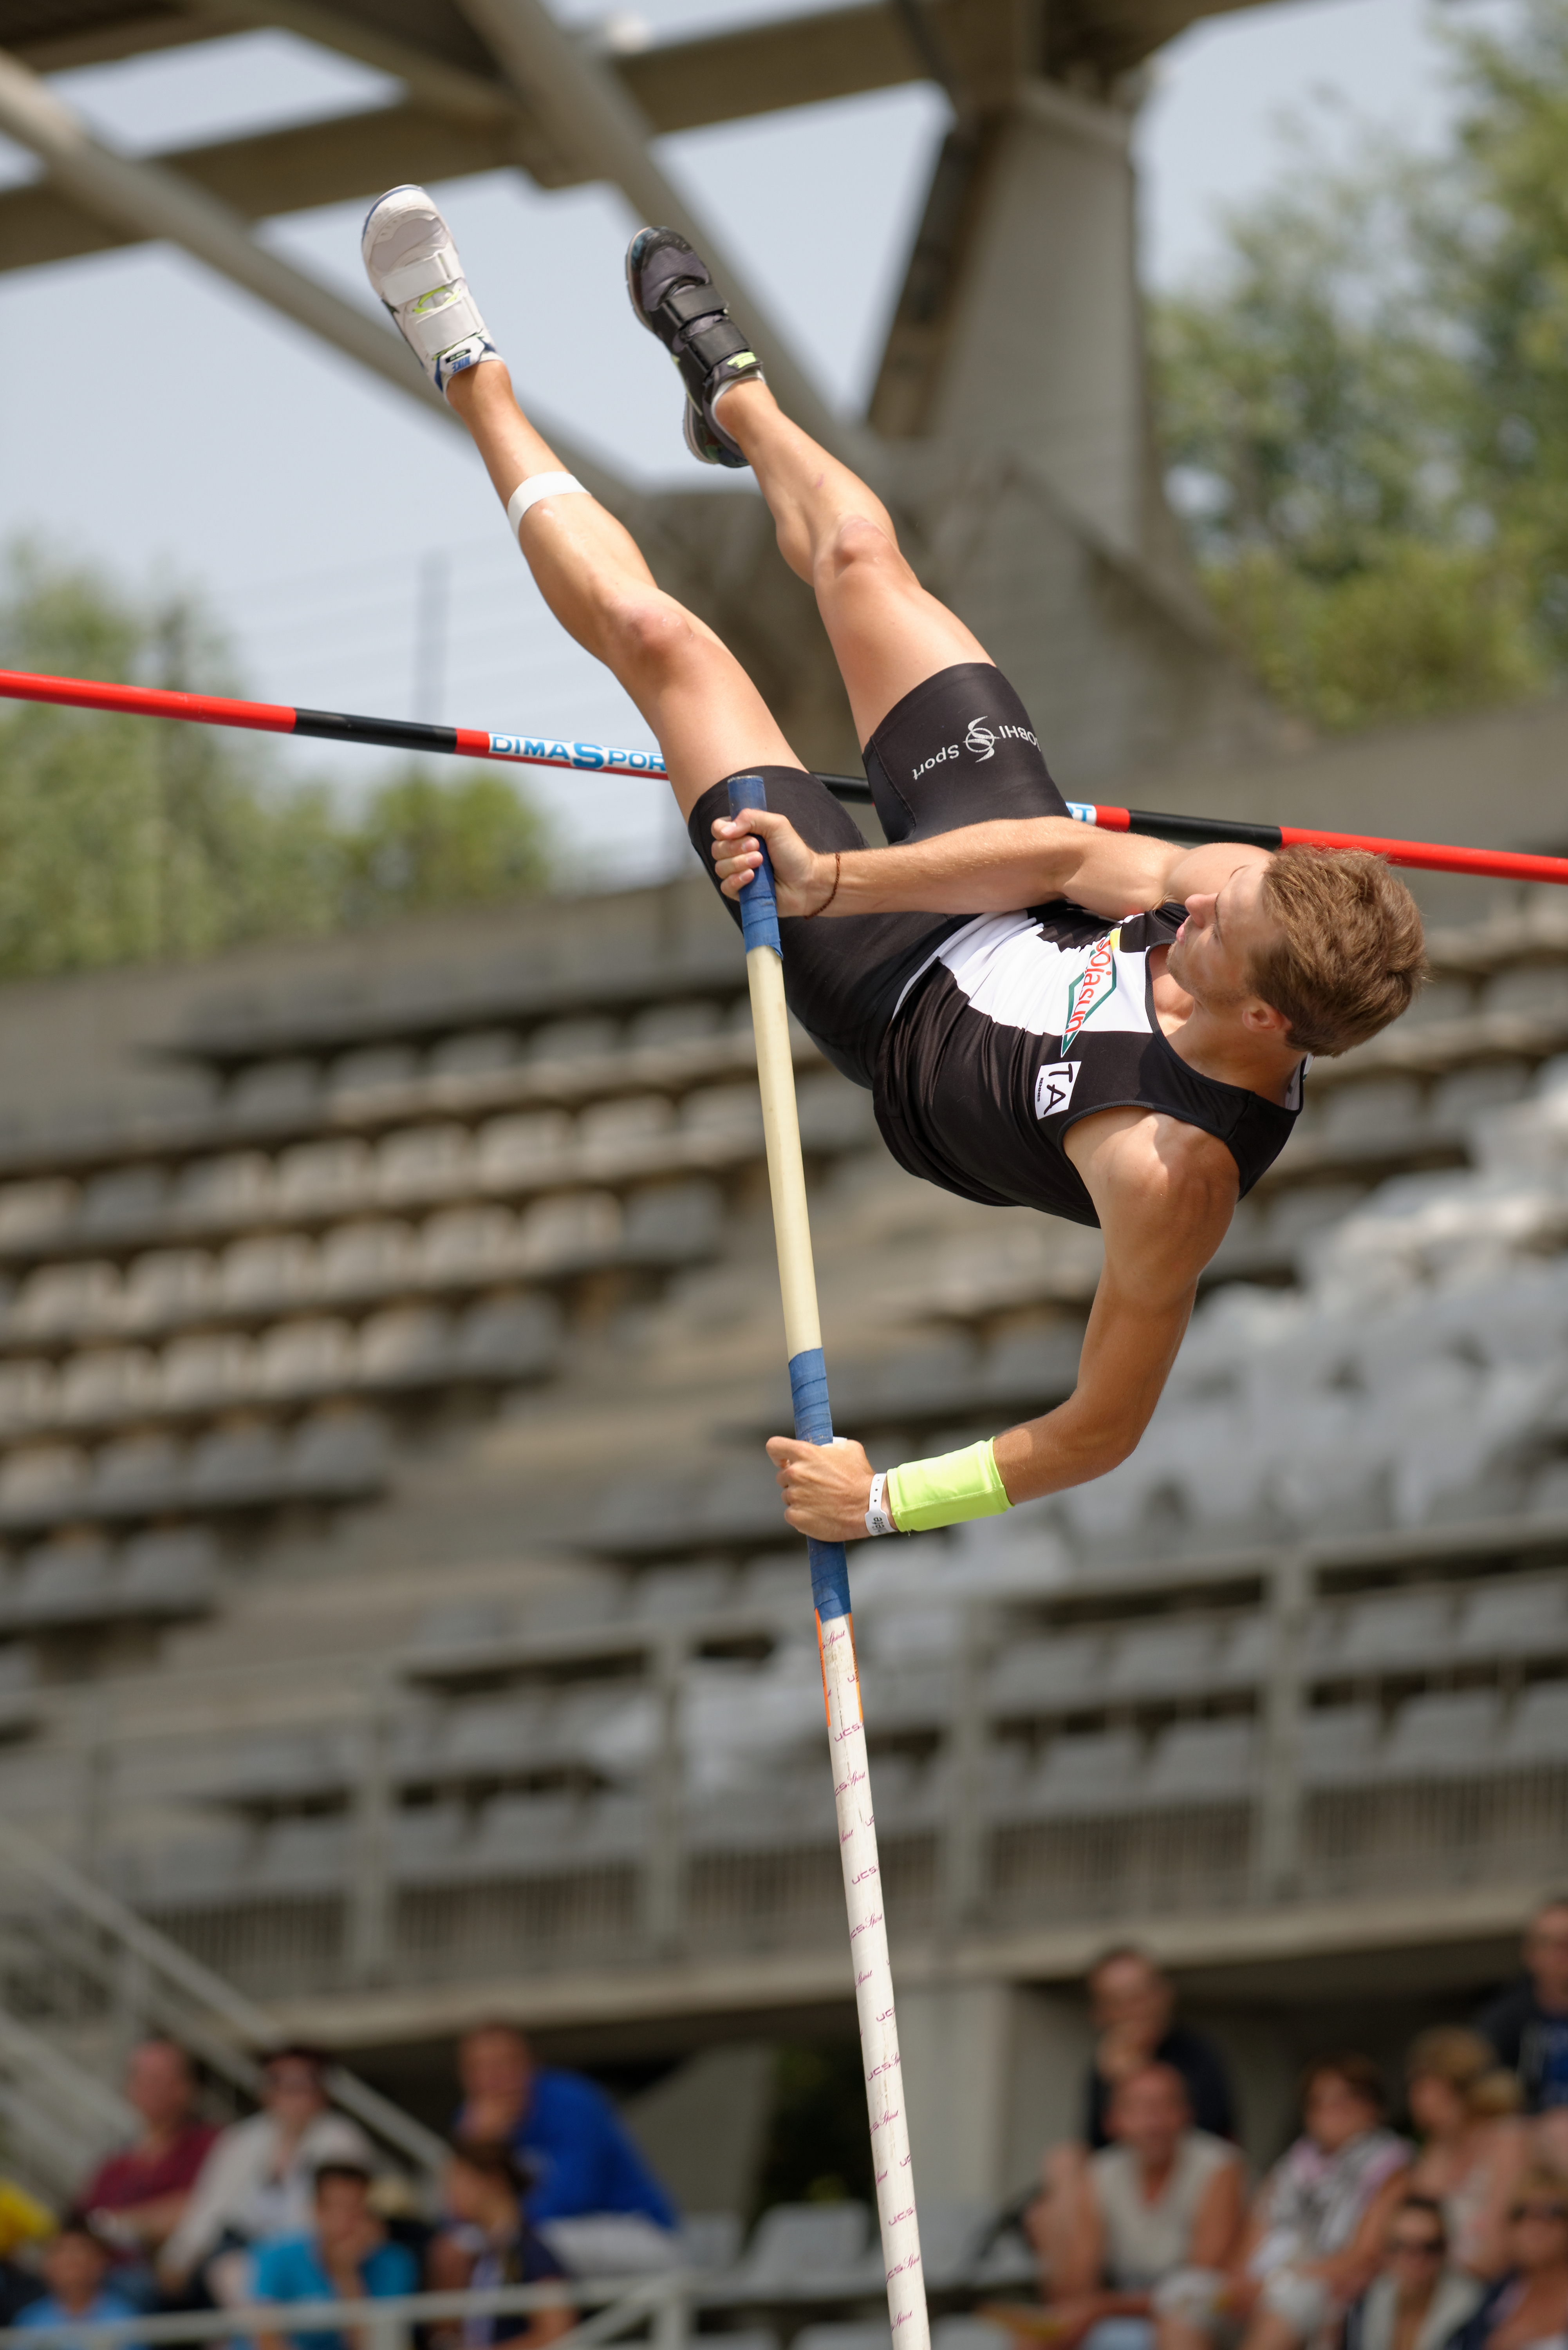 Pole Vault Wallpapers High Quality Download Free.